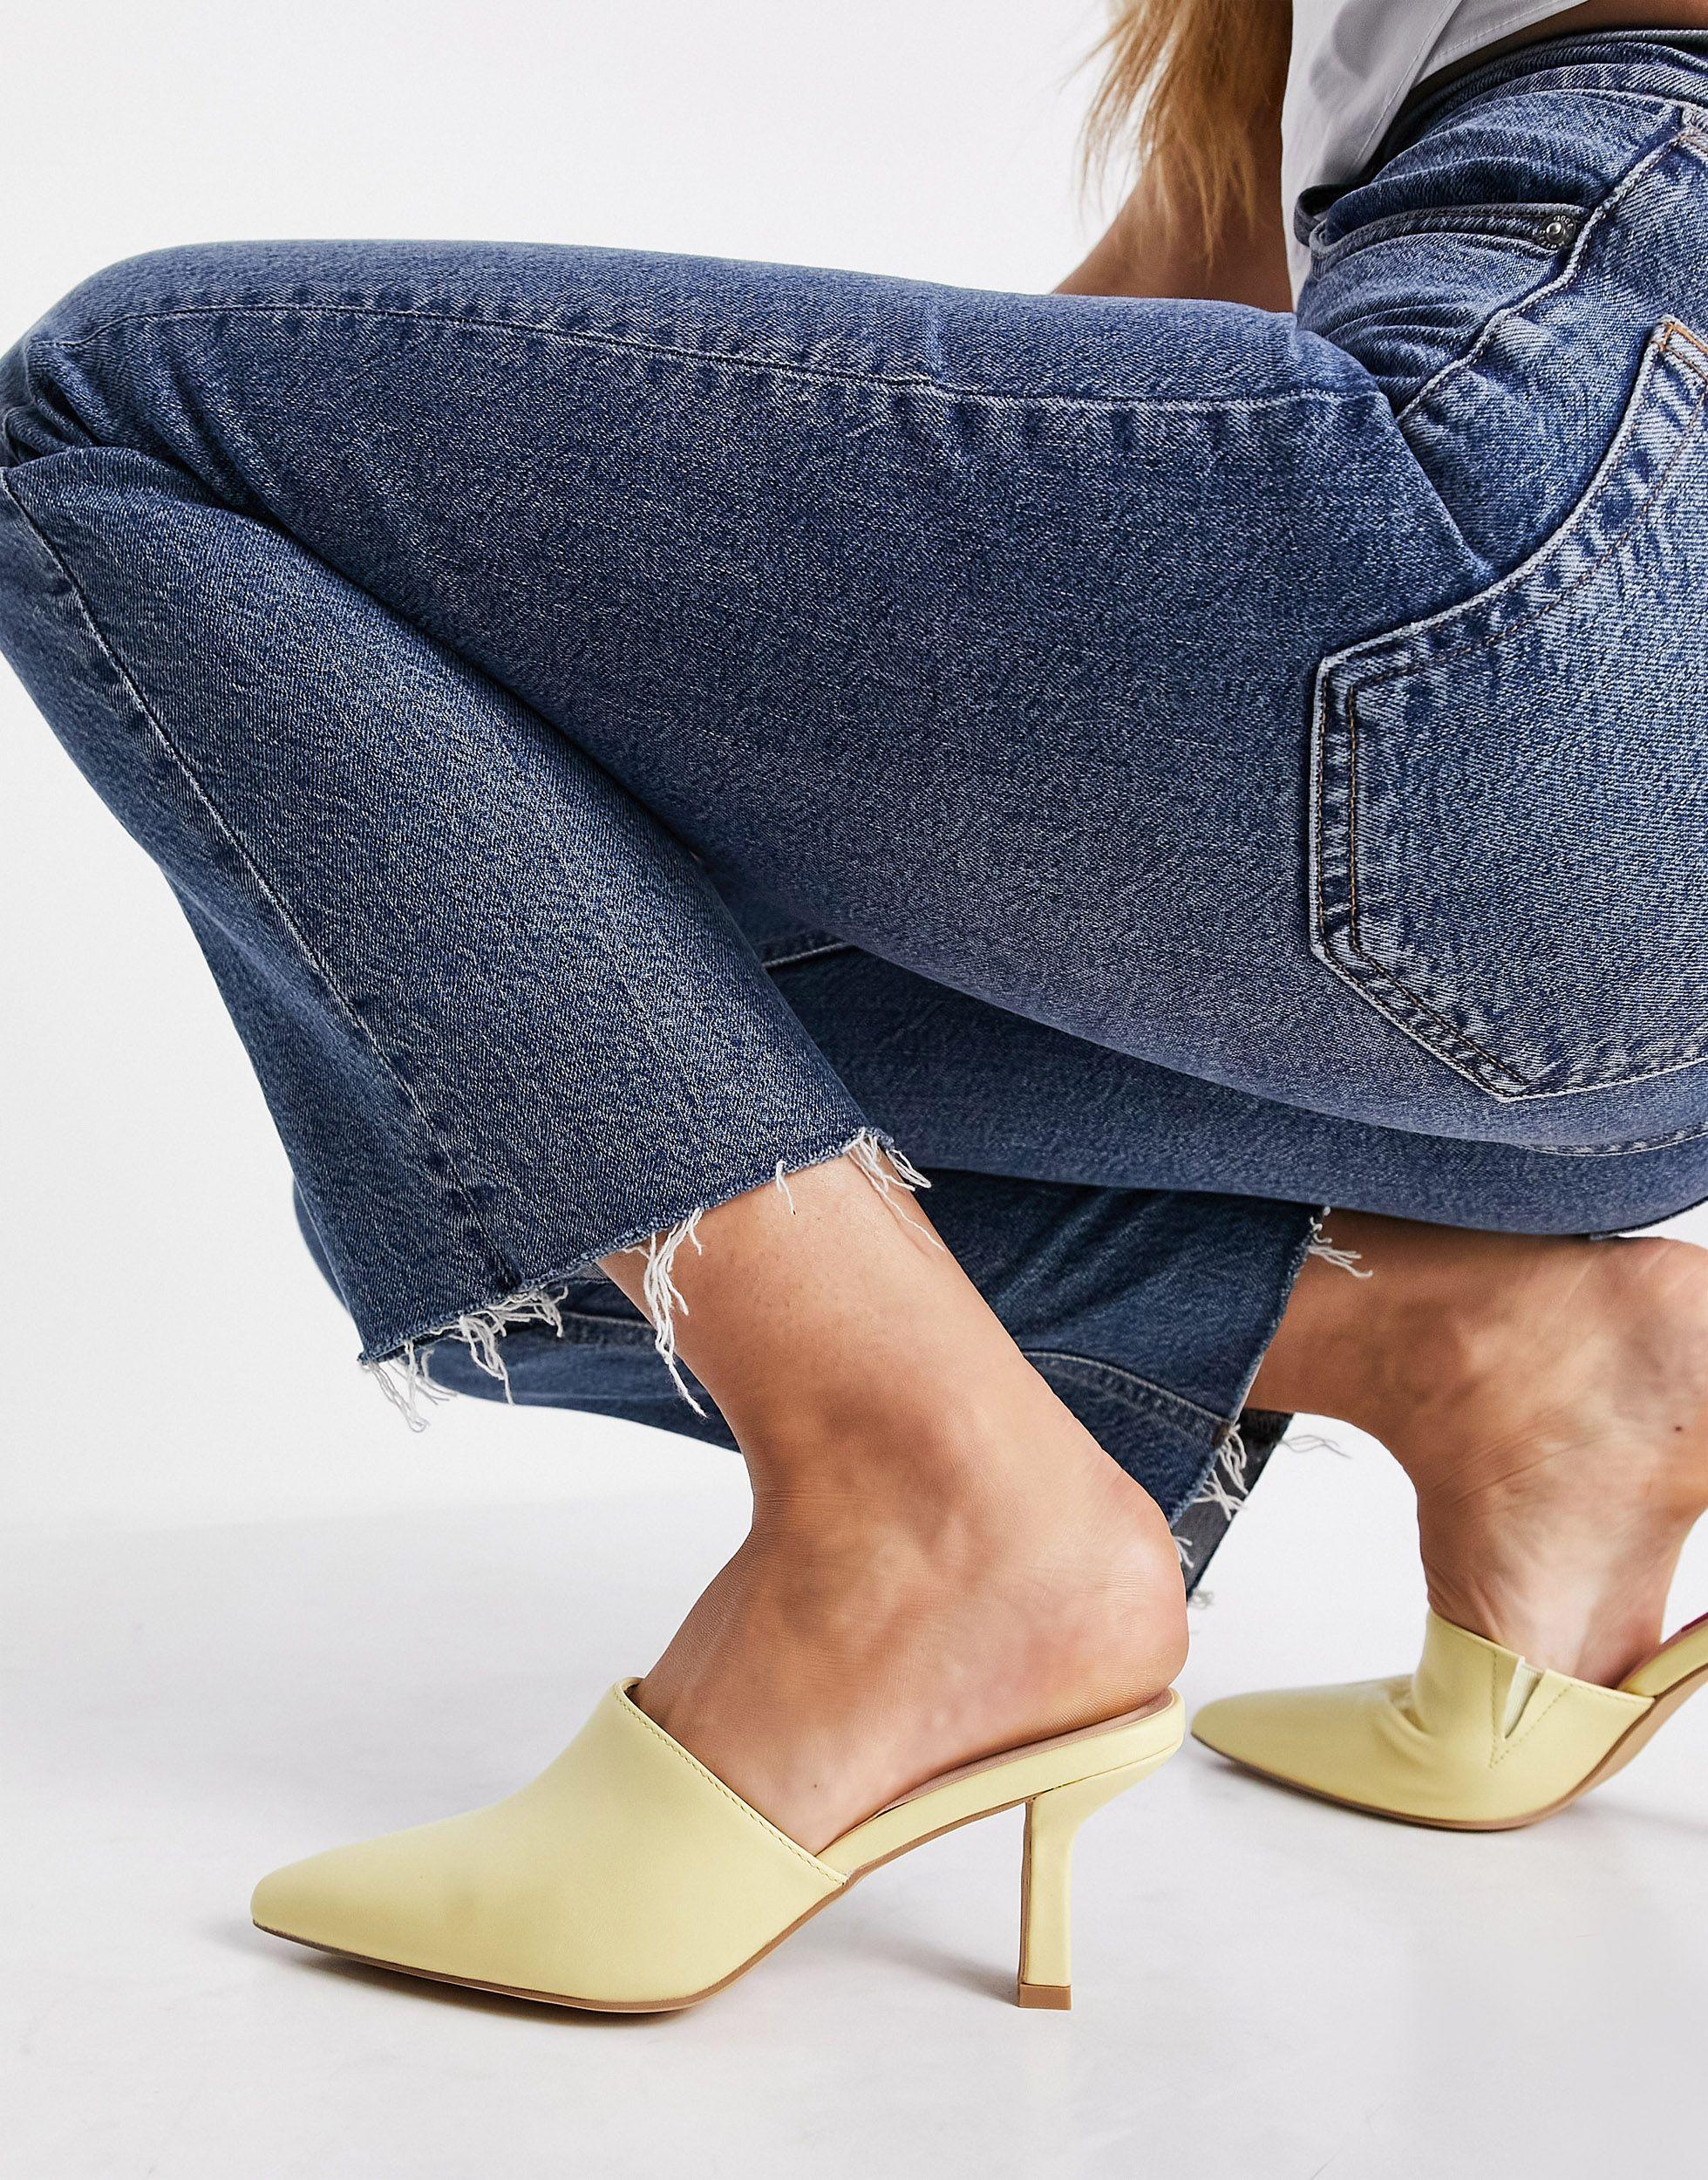 London Rebel Pointed Heeled Mules in Yellow - Lyst